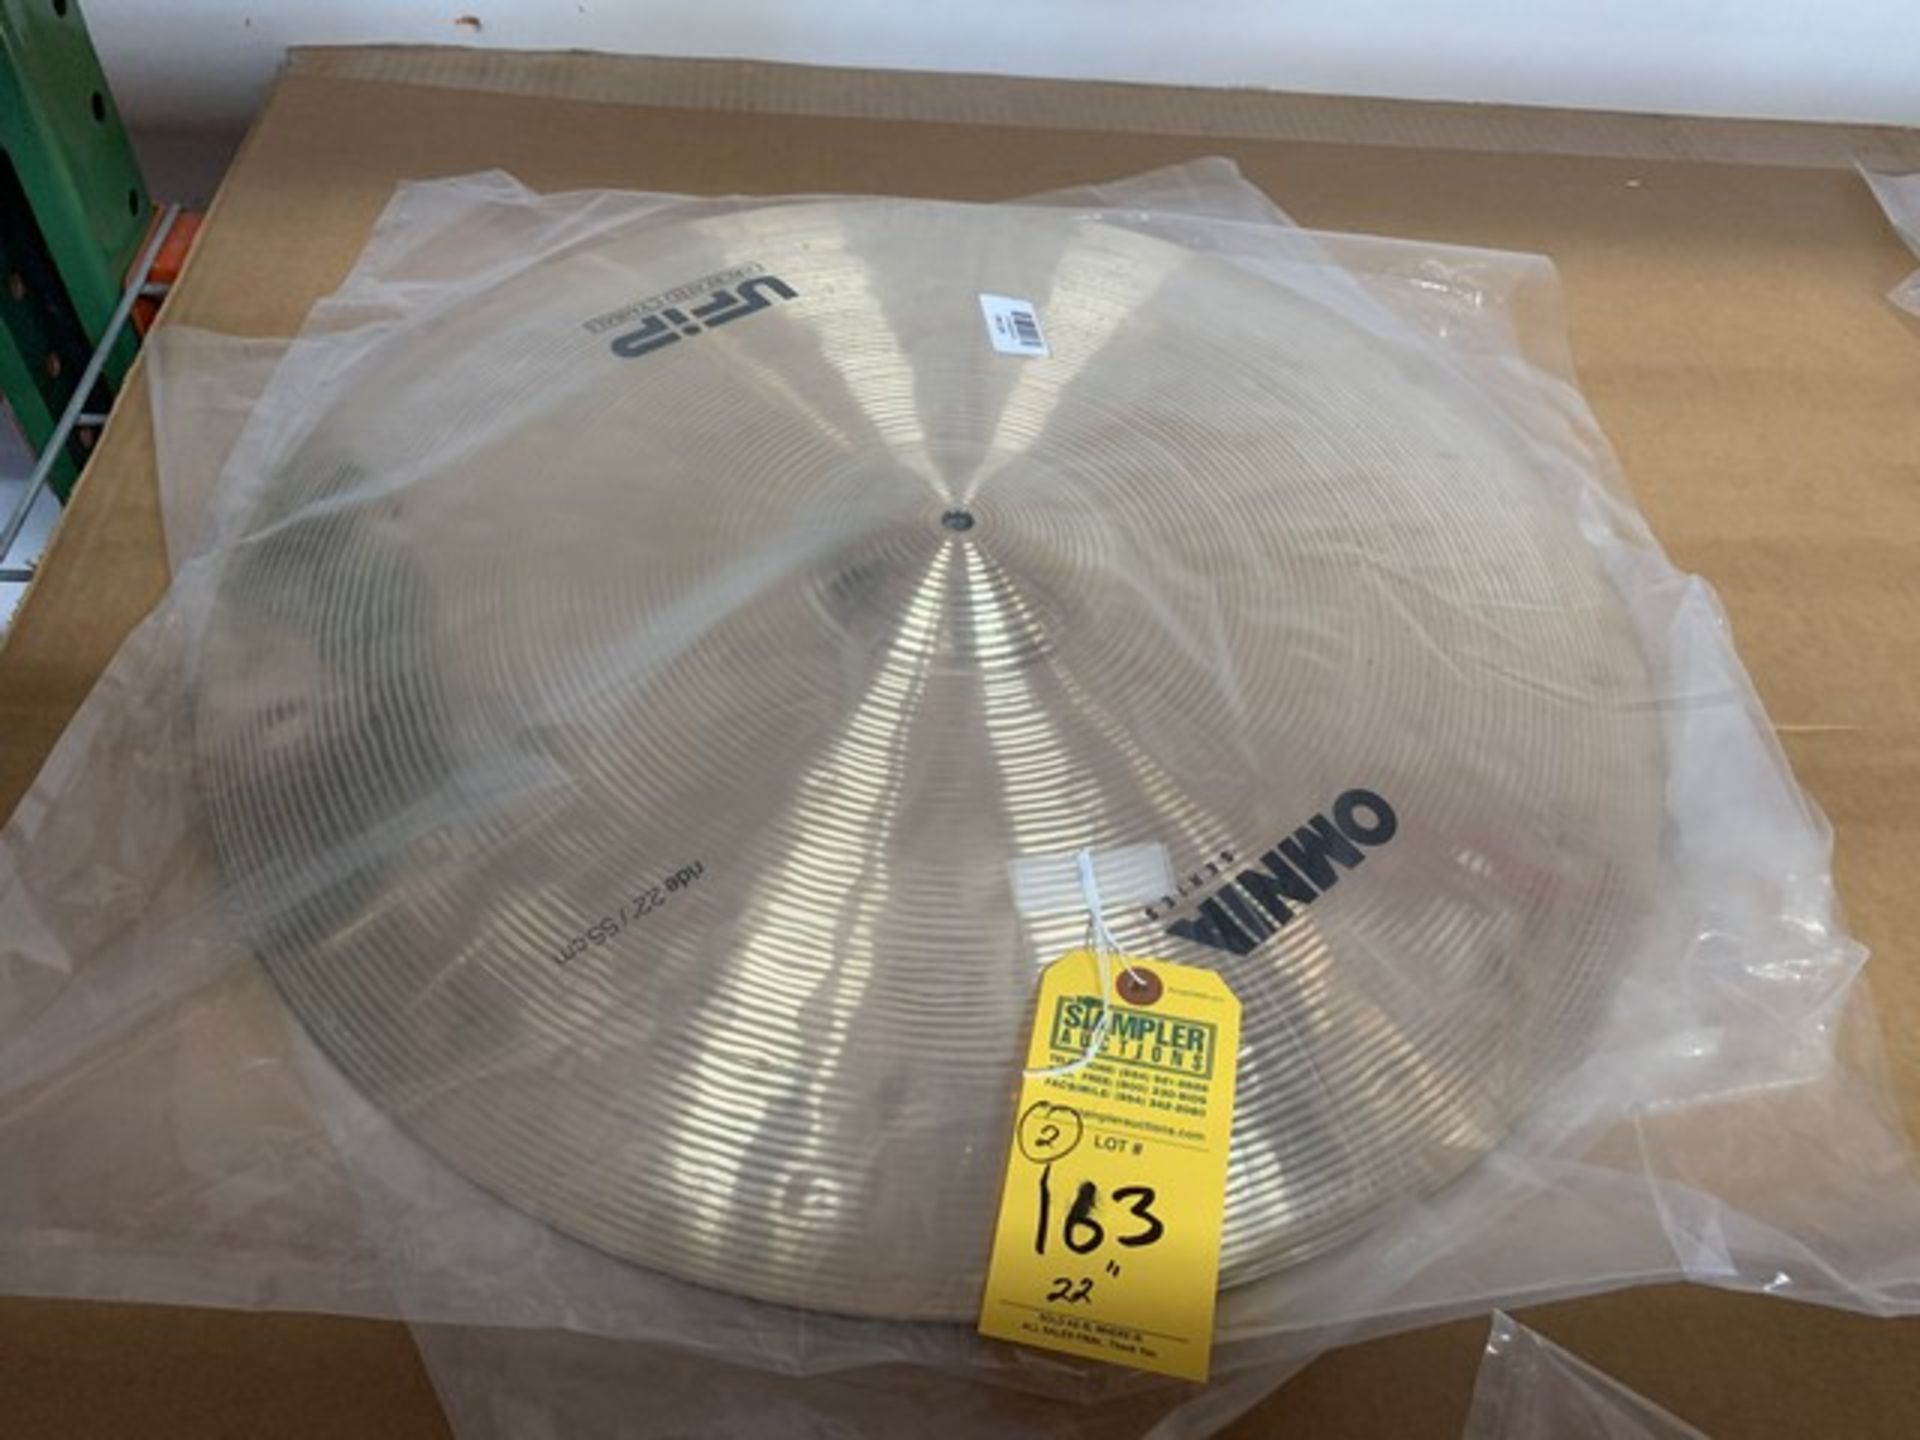 UFIP 22'' HIGH HAT SETS / CYMBALS - ASSORTED STYLES